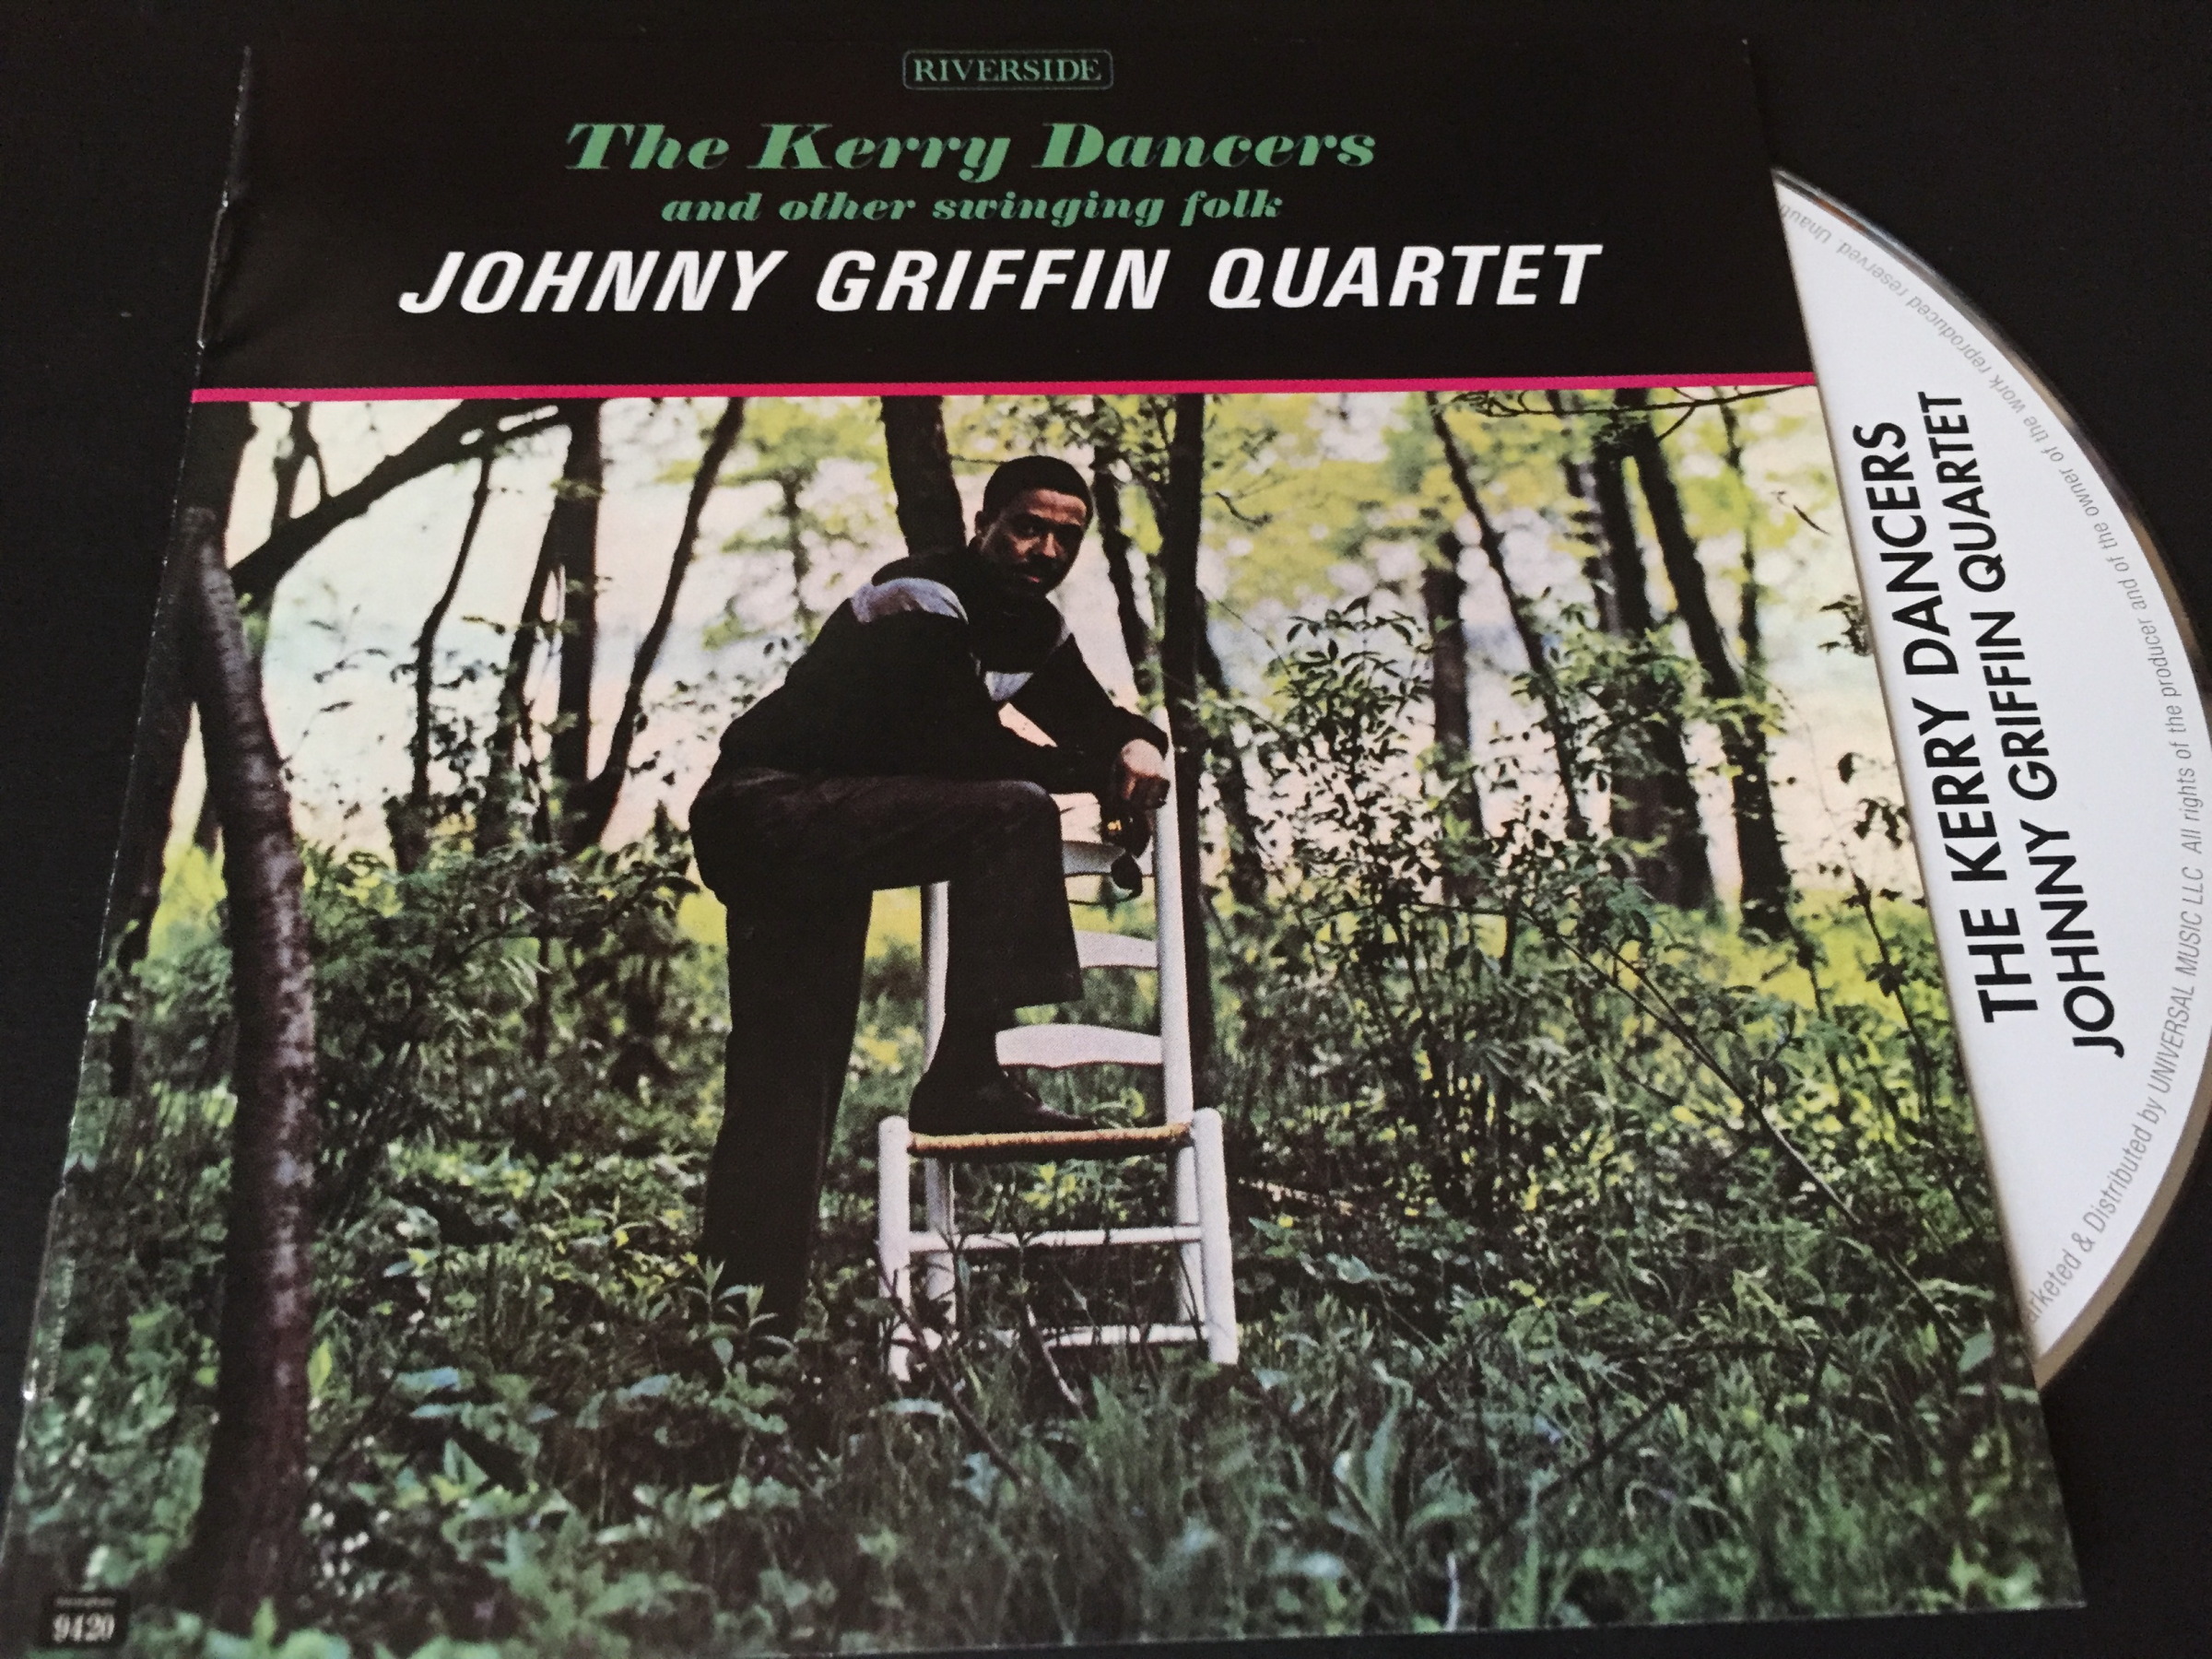 Johnny Griffin / The Kerry Dancers: 日々JAZZ的な生活